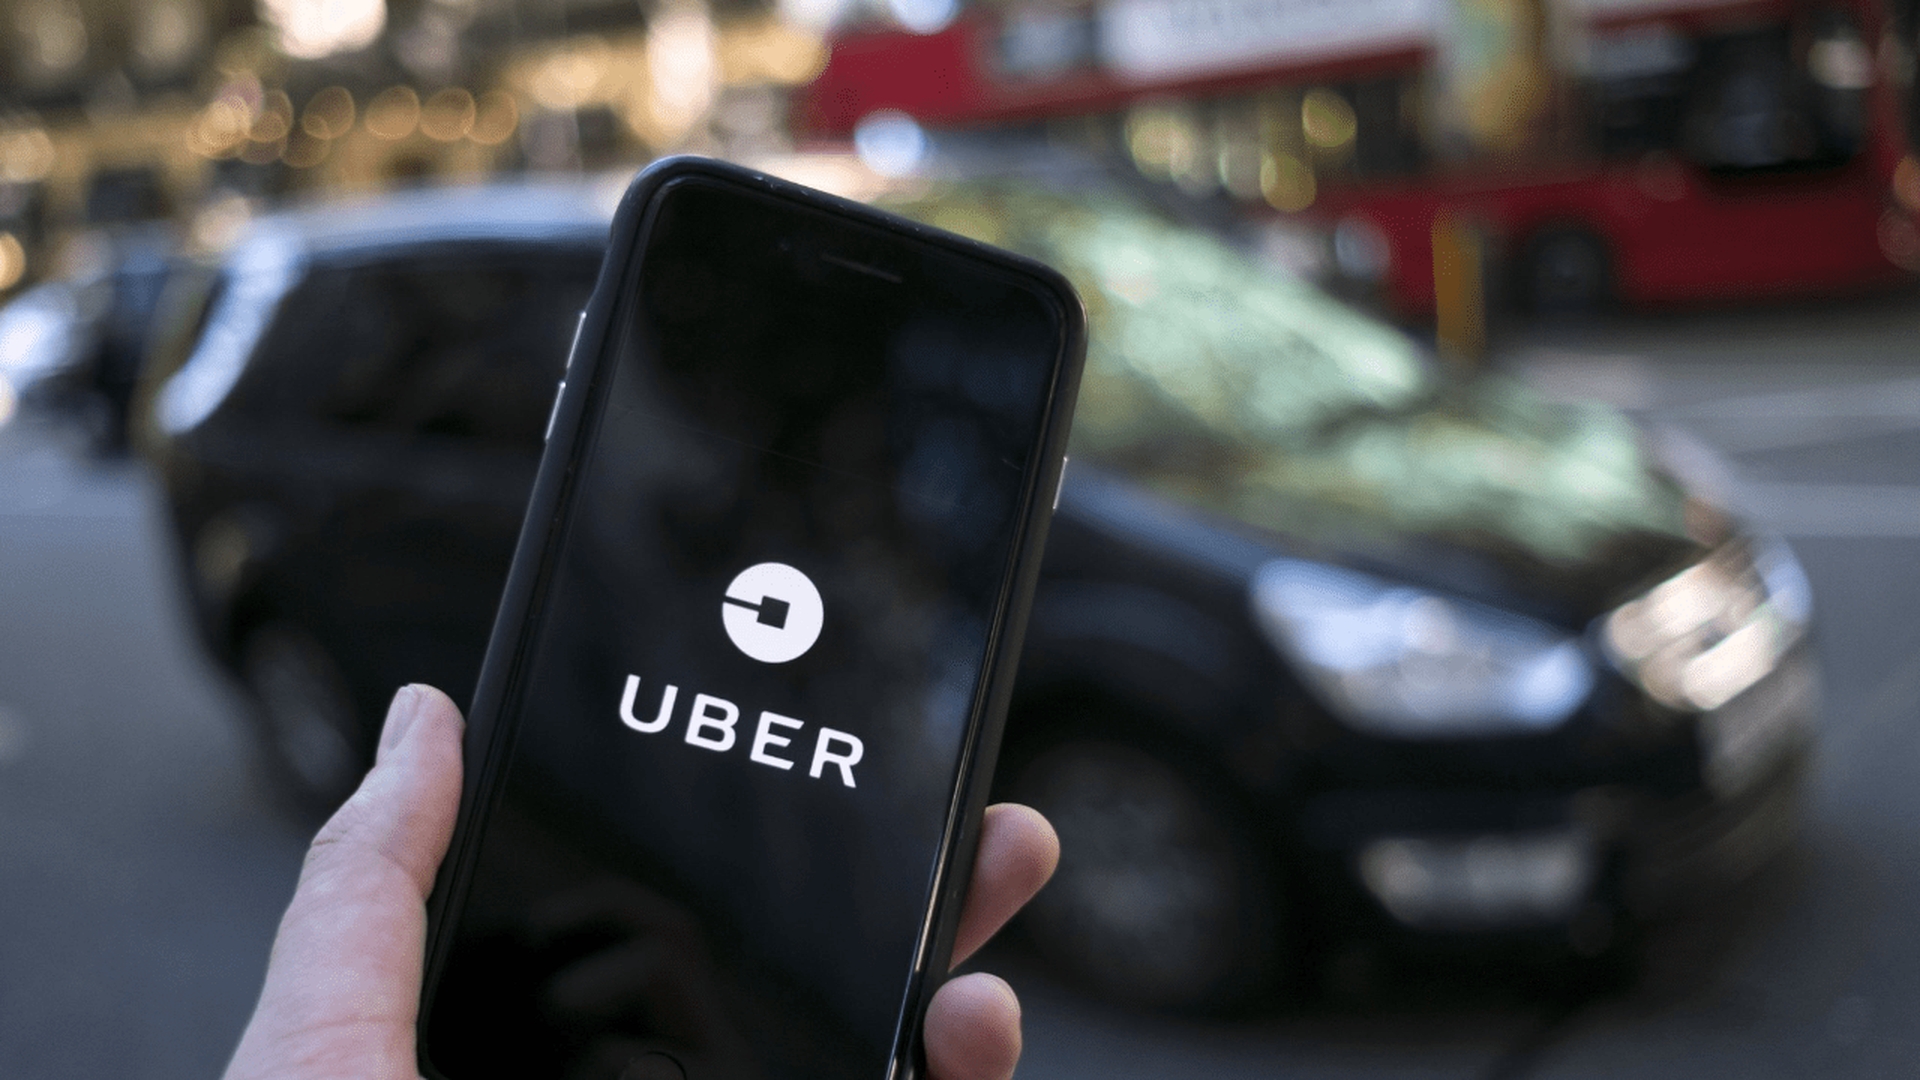 Learn about the innovative marketing used by Uber marketing department to promote their rideshare services. From targeted promotions to clever partnerships,...